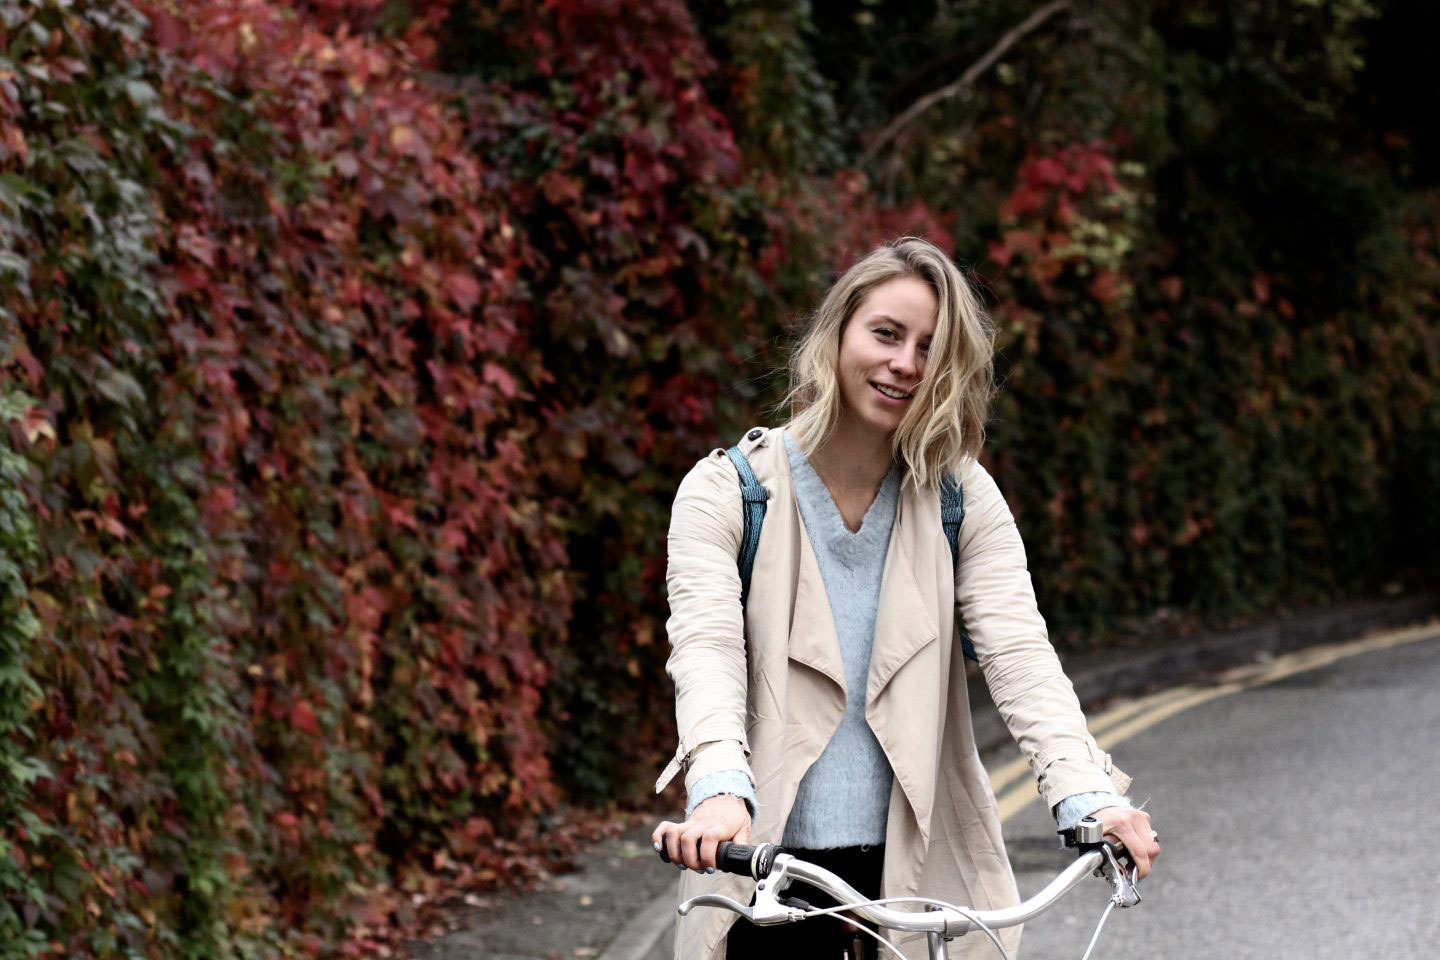 Velondonista: Bringing cycling and fashion together in London